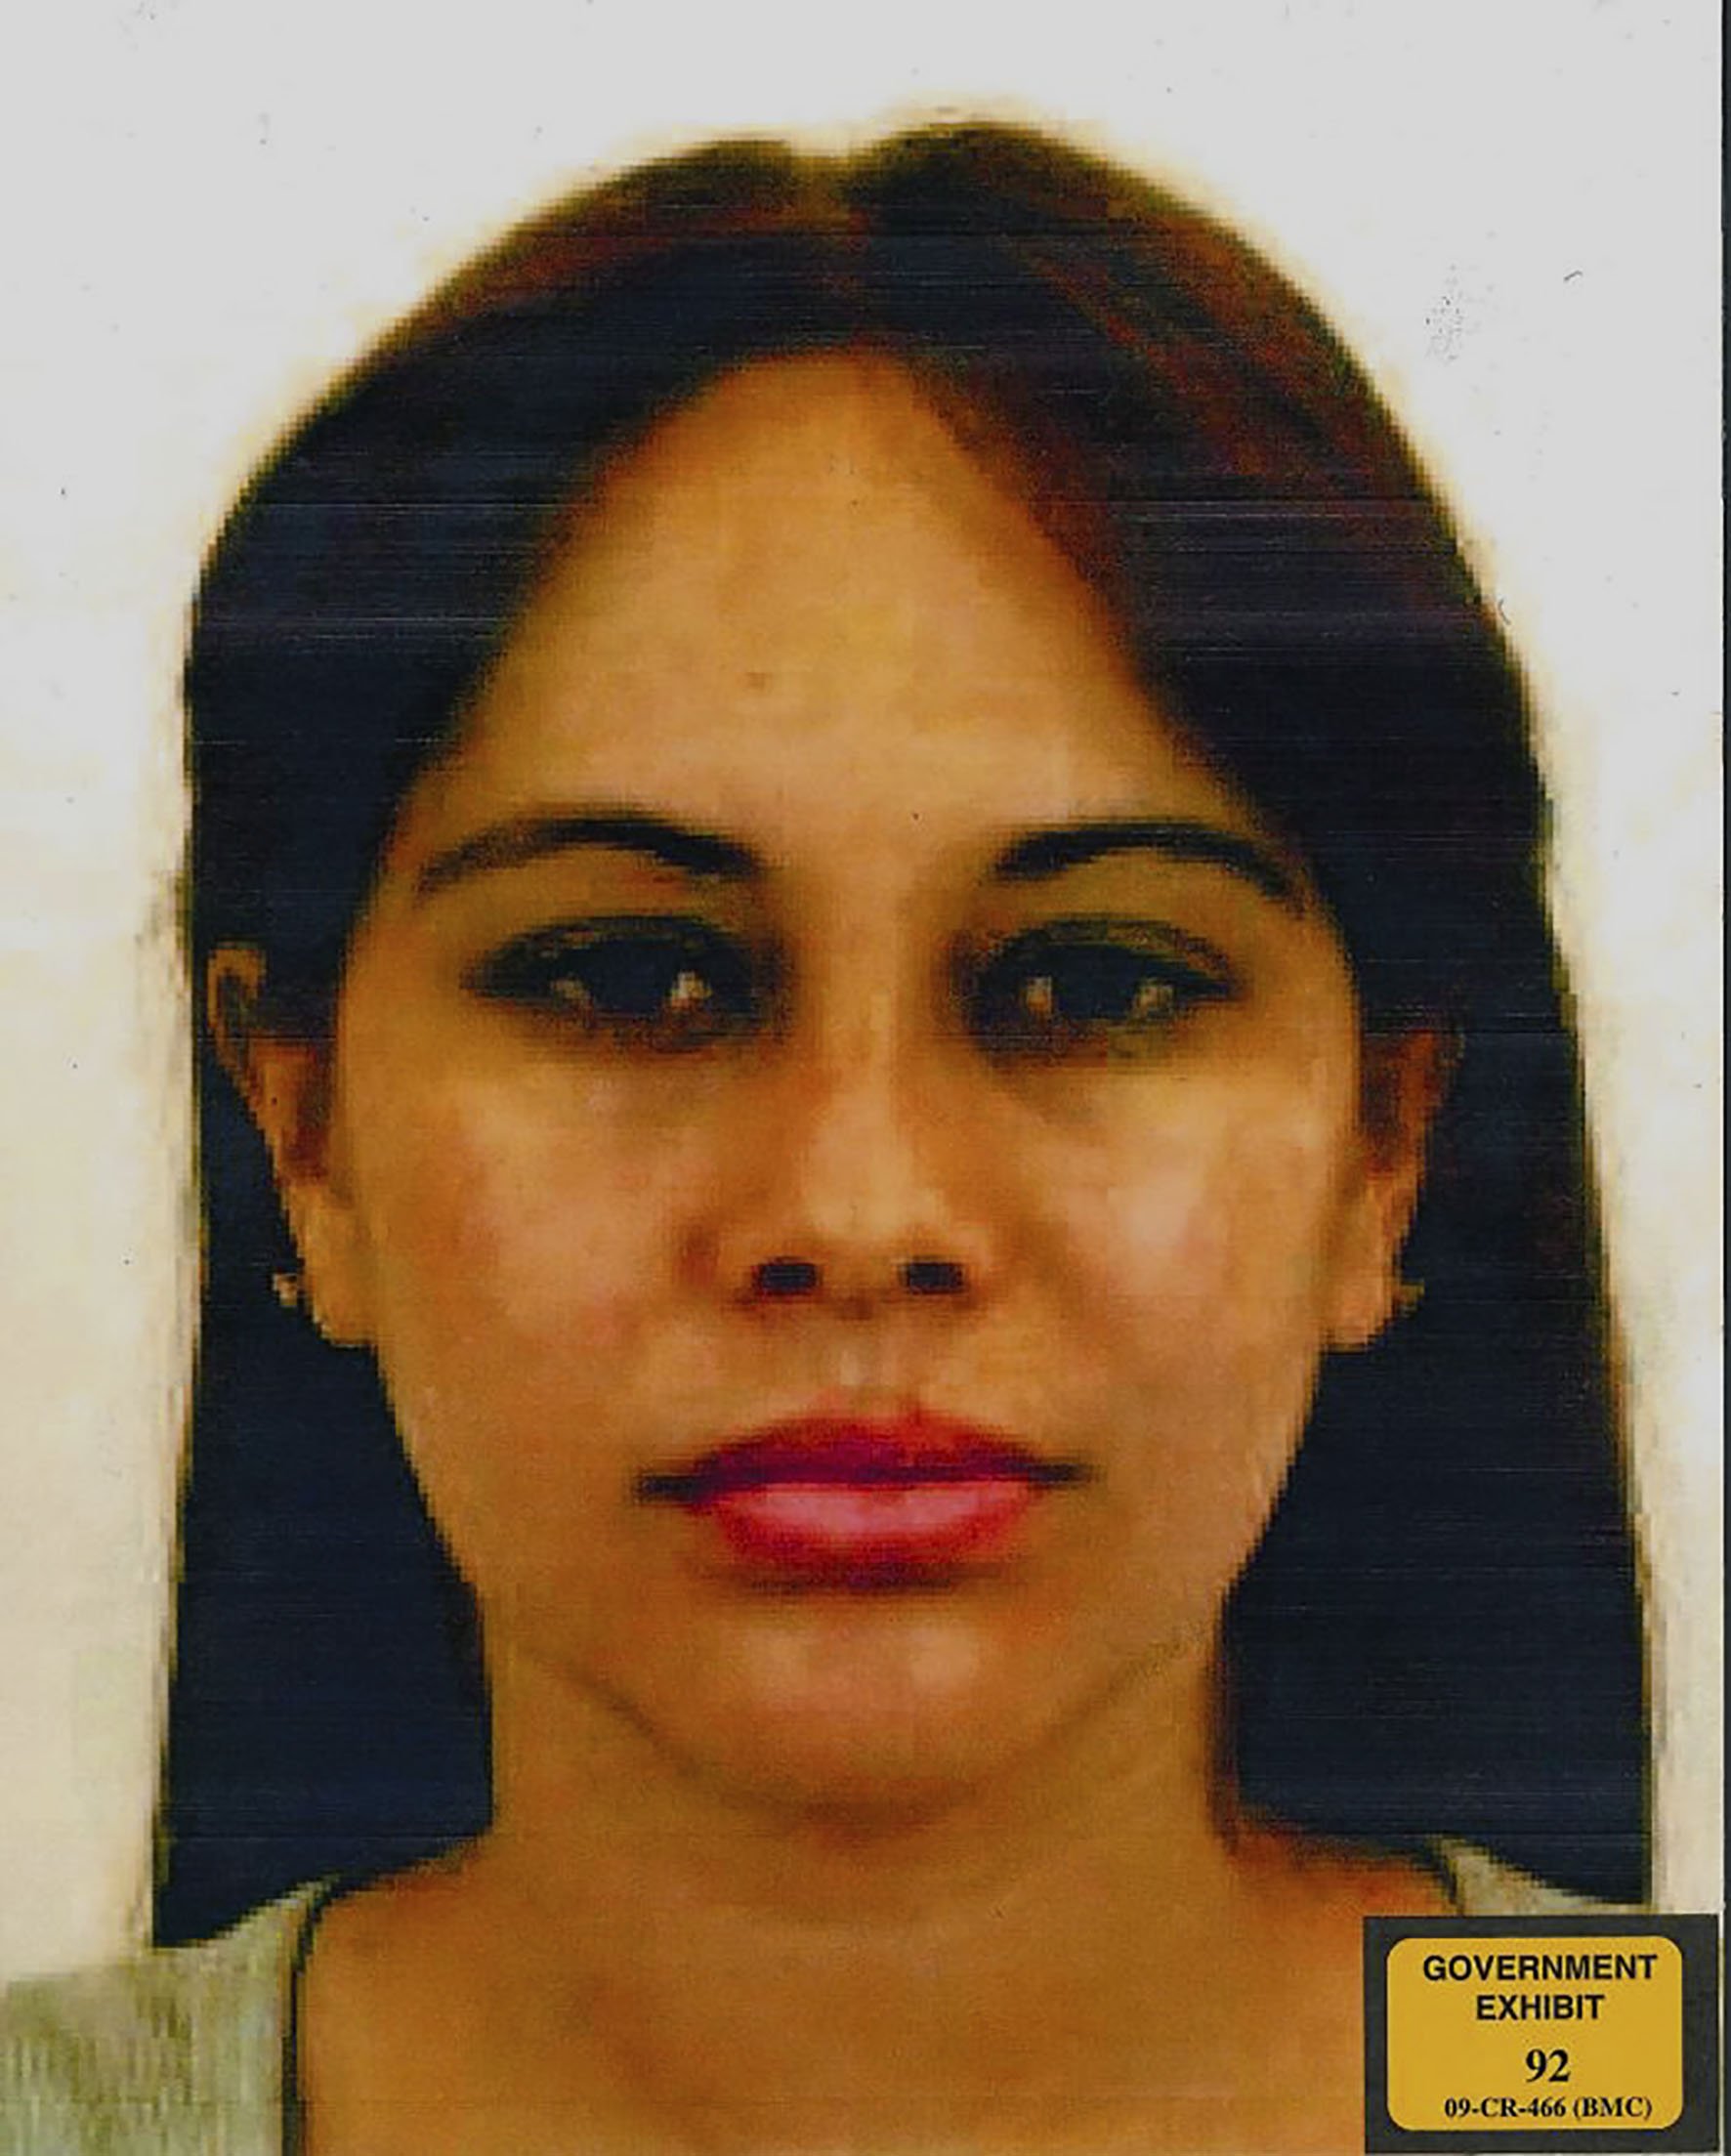 This Eastern District of New York (EDNY) undated evidence handout photo, submitted as evidence, and obtained Jan. 17, 2019 shows Lucero Guadalupe Sánchez López, 29, a Mexican former lover of Joaquin Chapo Guzman, who took the stand on the trial of the Mexican druglord as a government witness on Jan. 17, 2019. (EDNY Handout/AFP/Getty Images)